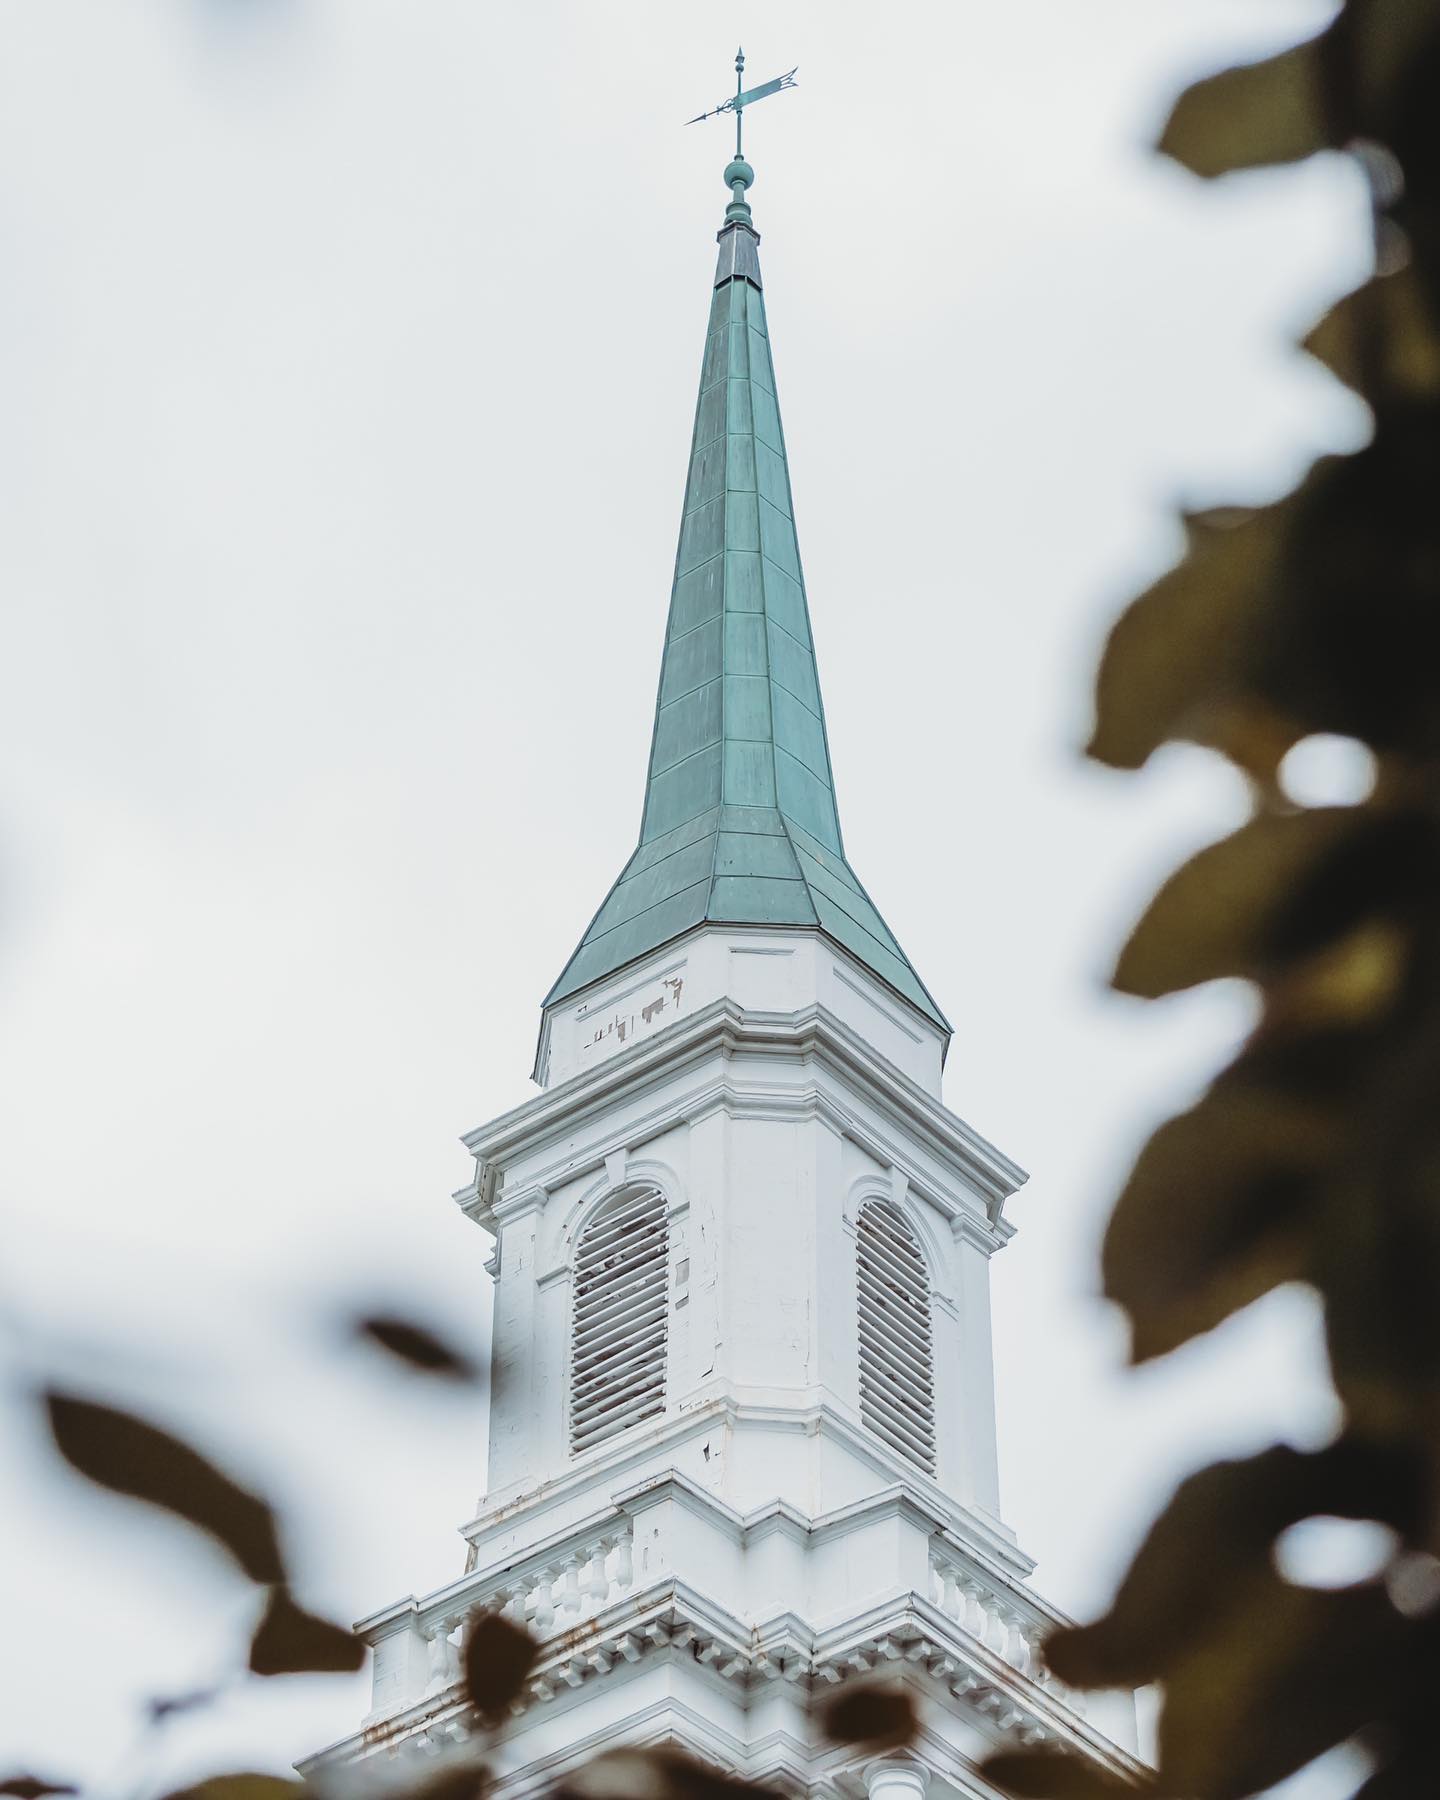 On a rainy day, the spire of the Old Post Chapel can be seen rising above Fort Myer Henderson Hall, towards the clouds.

The spire is clothed in a patina, that has developed through years of exposure to the elements.  A patina is something transformed beautifully through age or use.  This spire is a representation of all those that pass beneath it.  Soldiers, veterans, families, spouses, and friends that support a higher purpose, an honor, and a duty.

Serving our country each and every day.